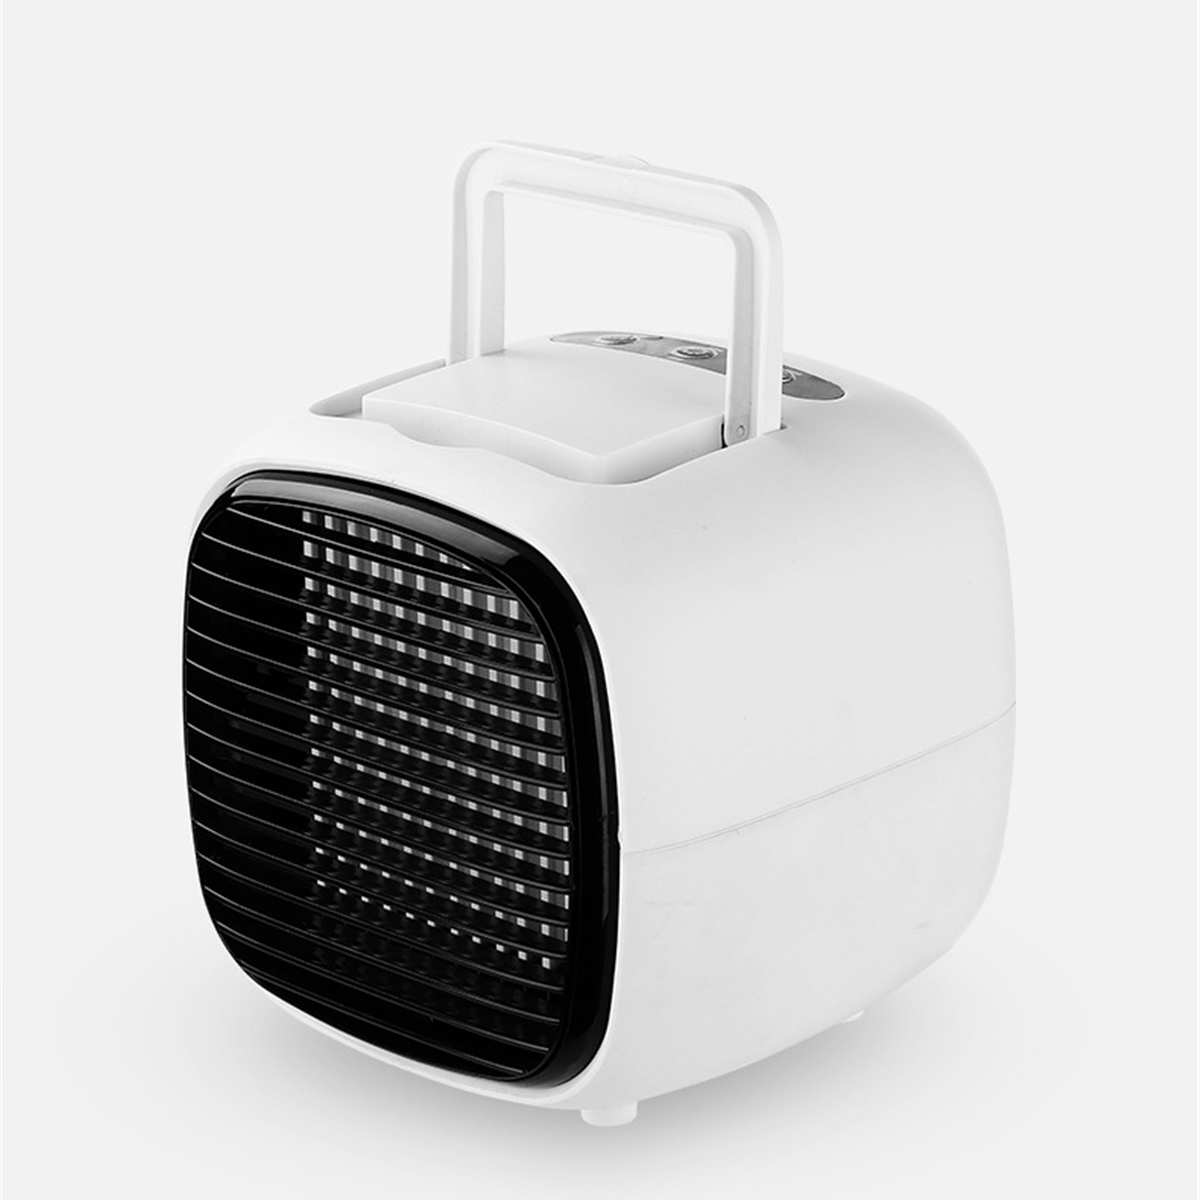 Find 2 Gears Mini Box Fan Air Conditioner Water Cooling Portable Fan Air Cooler Humidifier for Sale on Gipsybee.com with cryptocurrencies